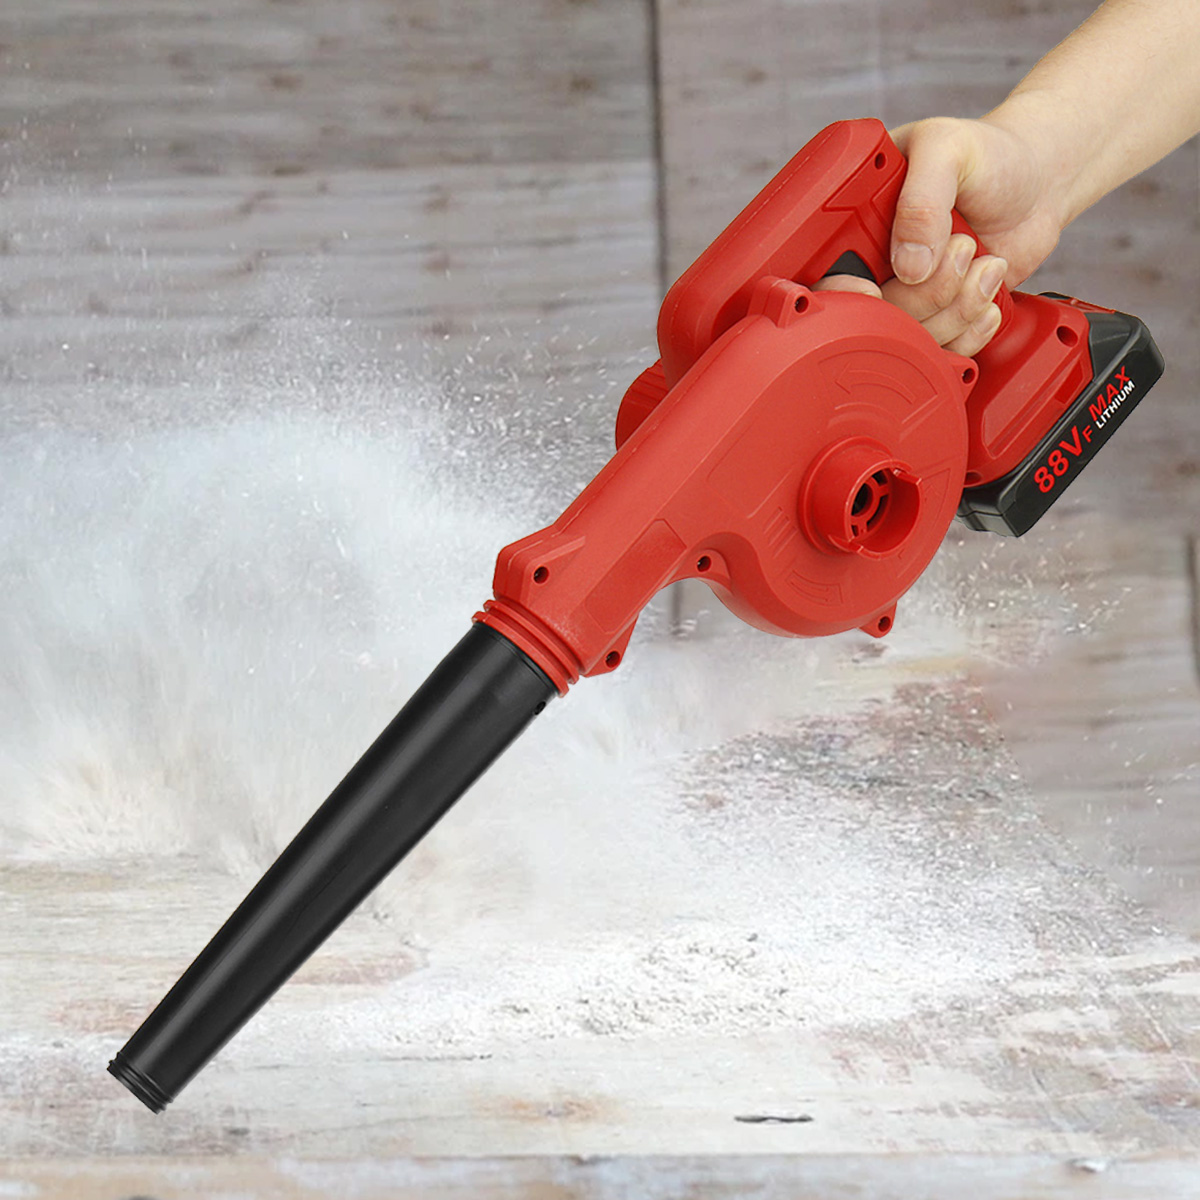 88VF-Garden-Cordless-Air-Blower-Vacuum-Cleaner-Blower-For-Dust-Blowing-W-None12pcs-Battery-Also-for--1851657-12